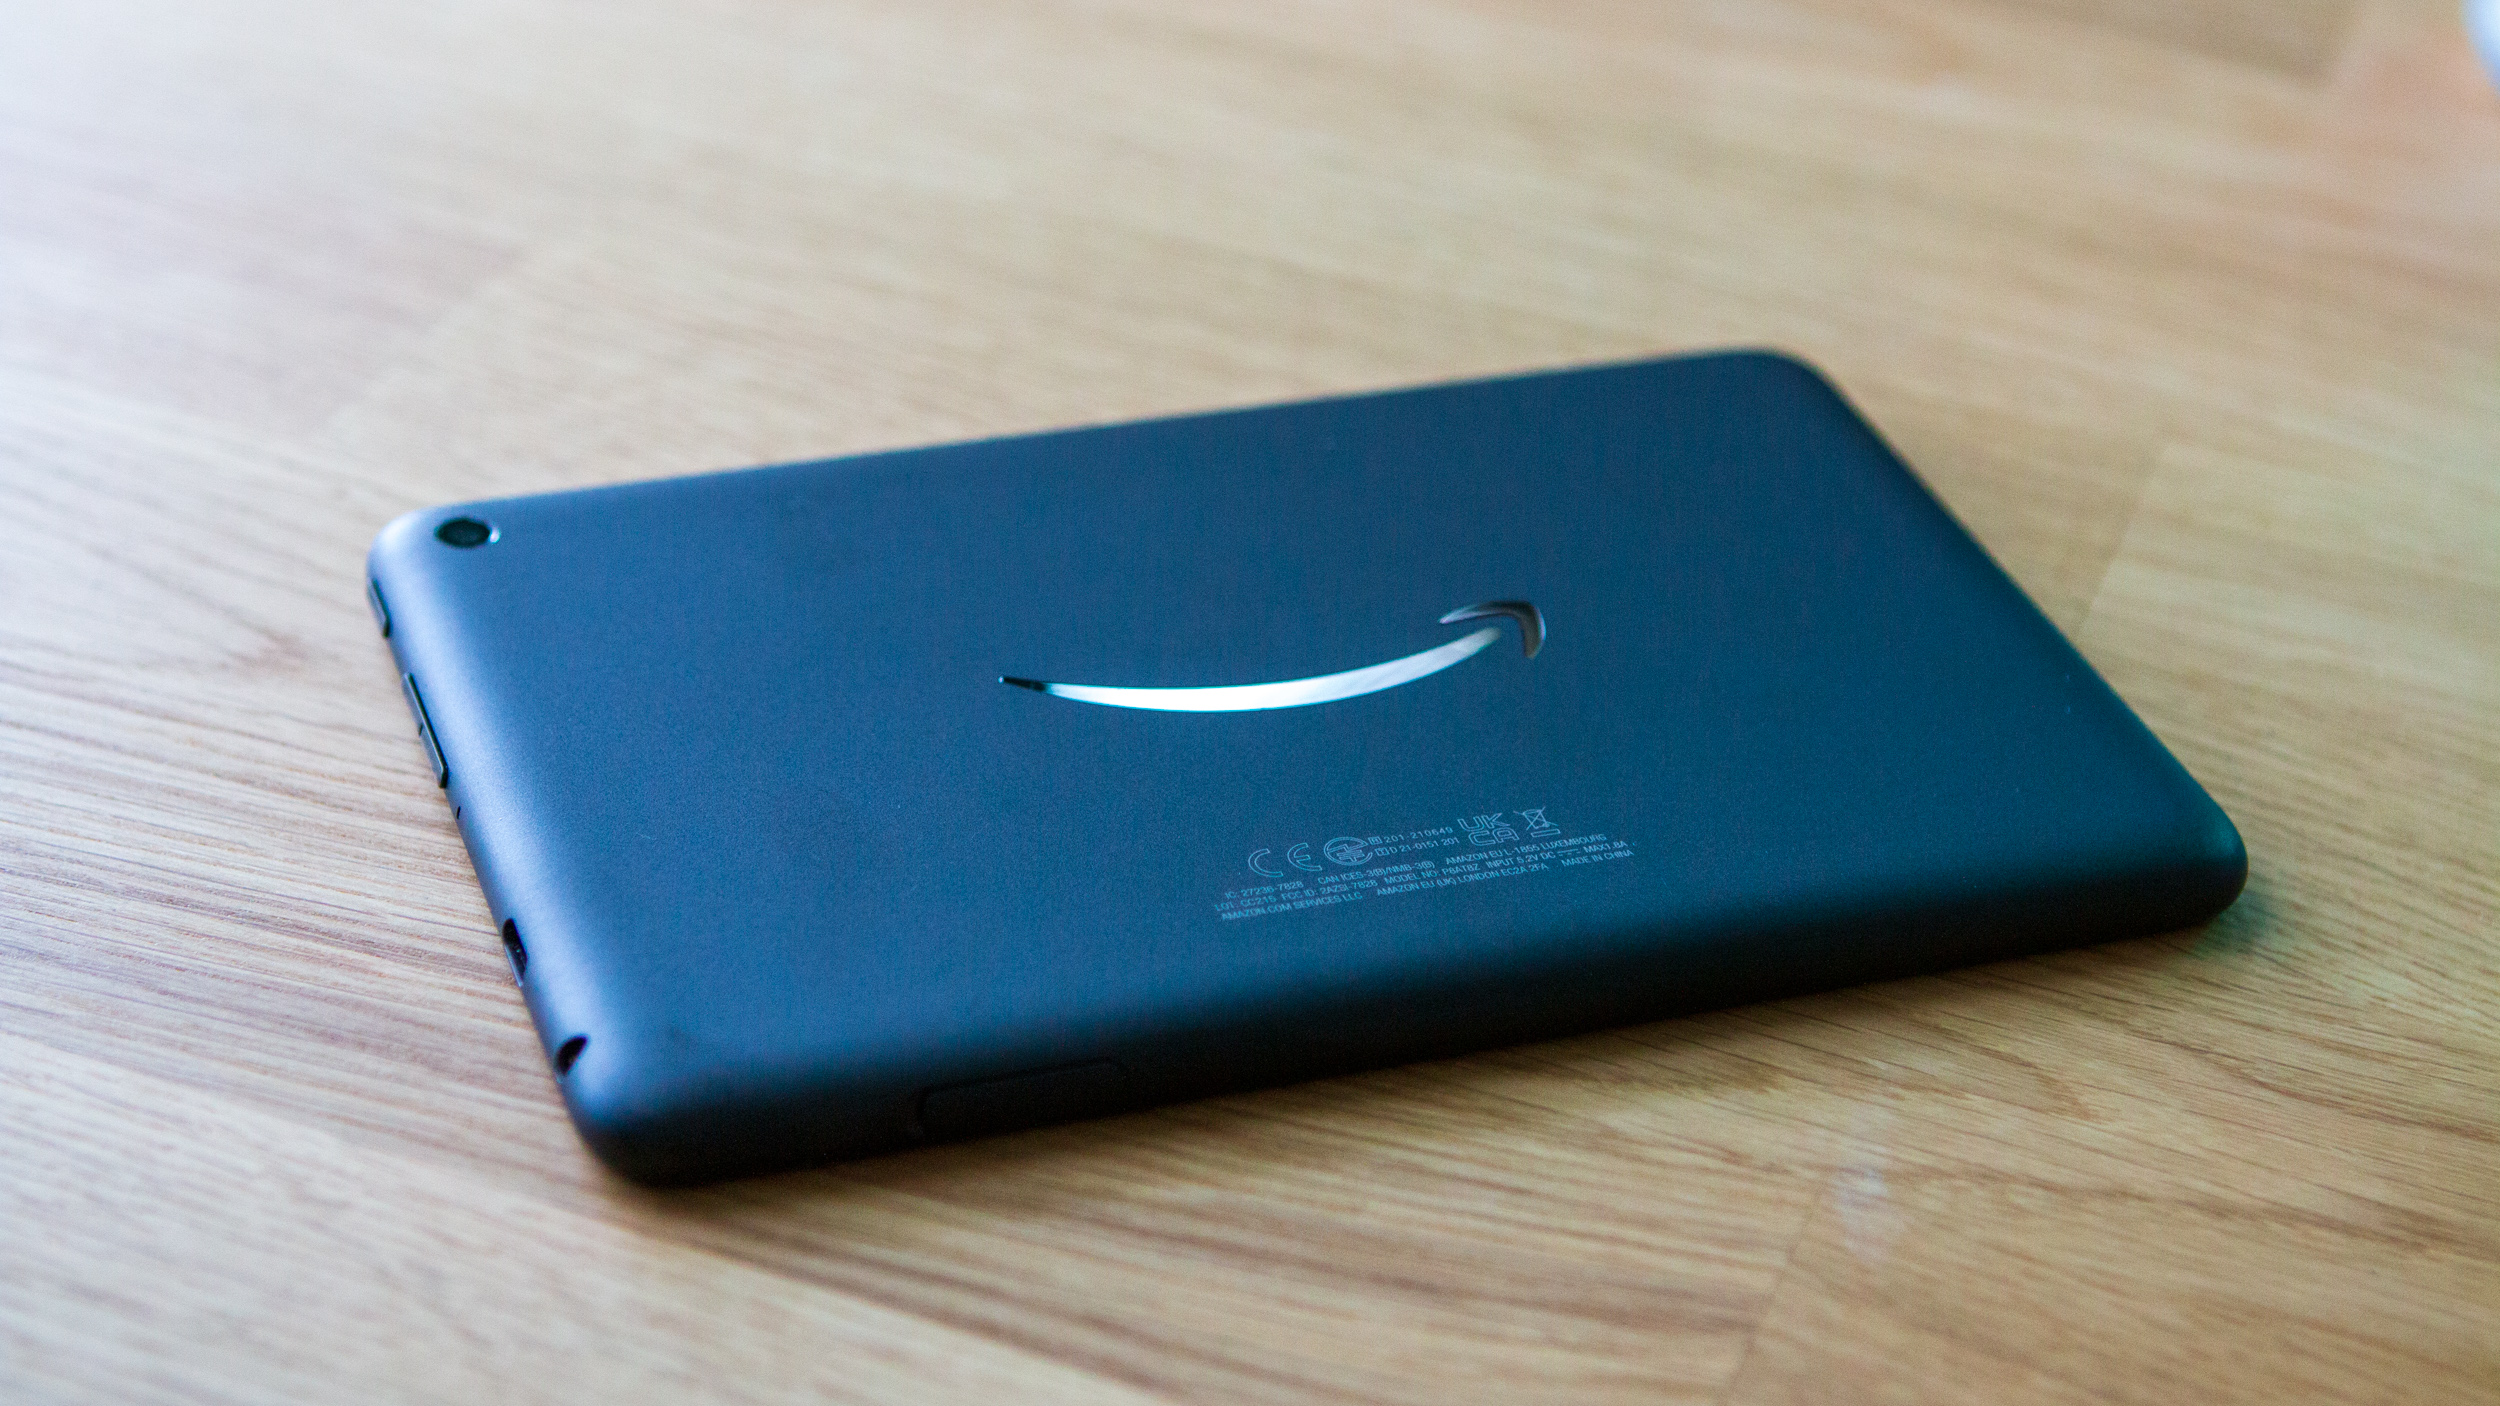 Amazon Fire 7 (2022) upside down on the table with lighting on the logo